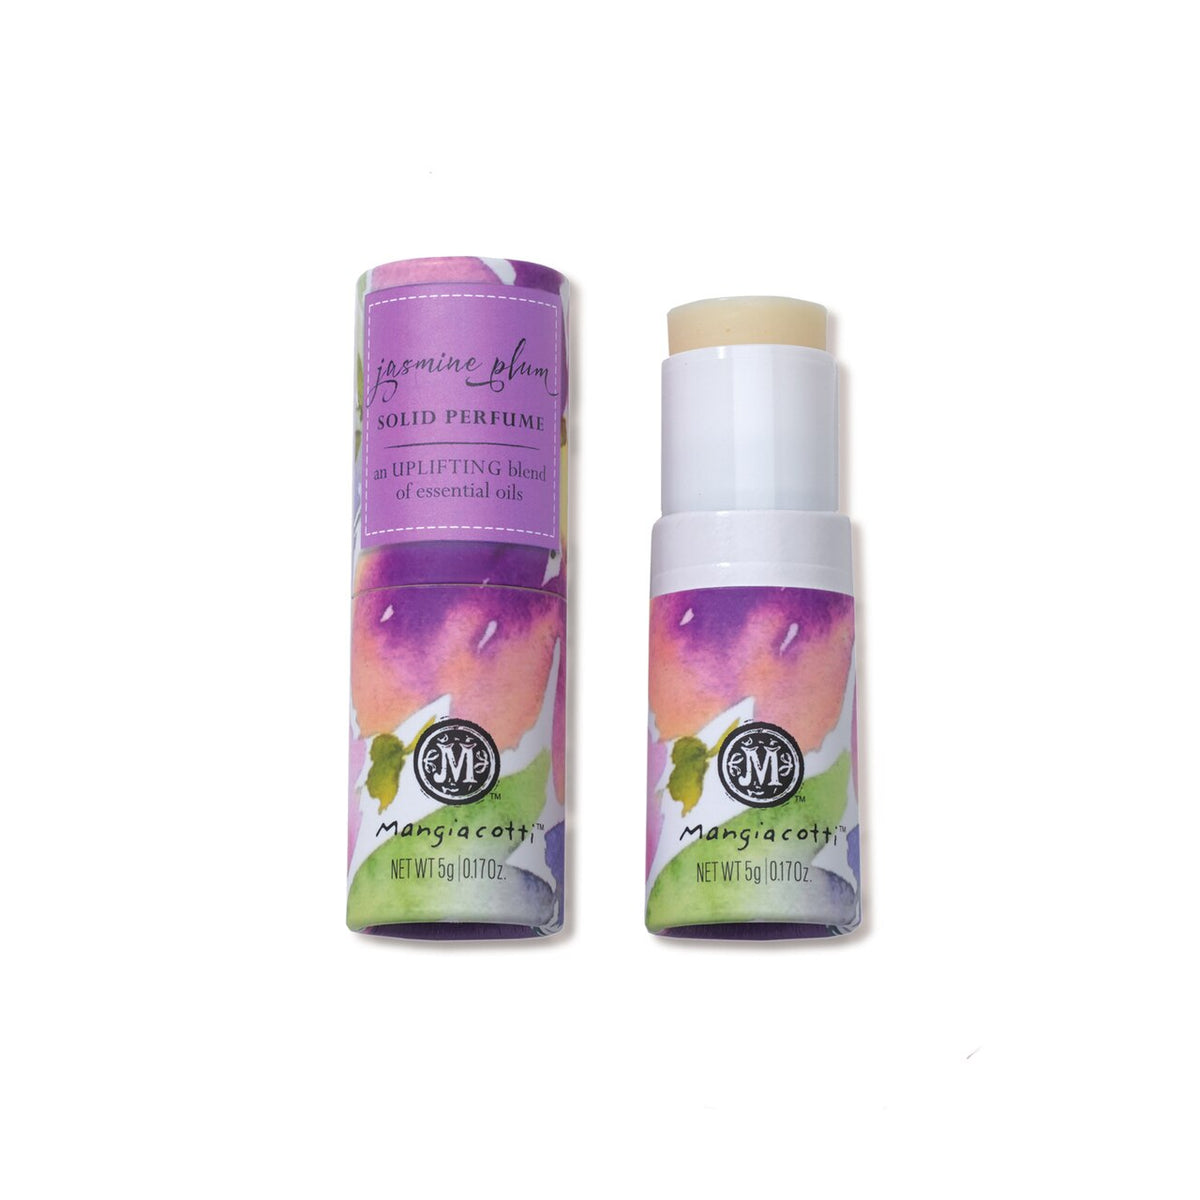 Two cylindrical containers of Mangiacotti Jasmine Plum Solid Perfume solid perfume stick with colorful purple and pink labels, one closed and one with the cap off revealing the non-greasy formula product.